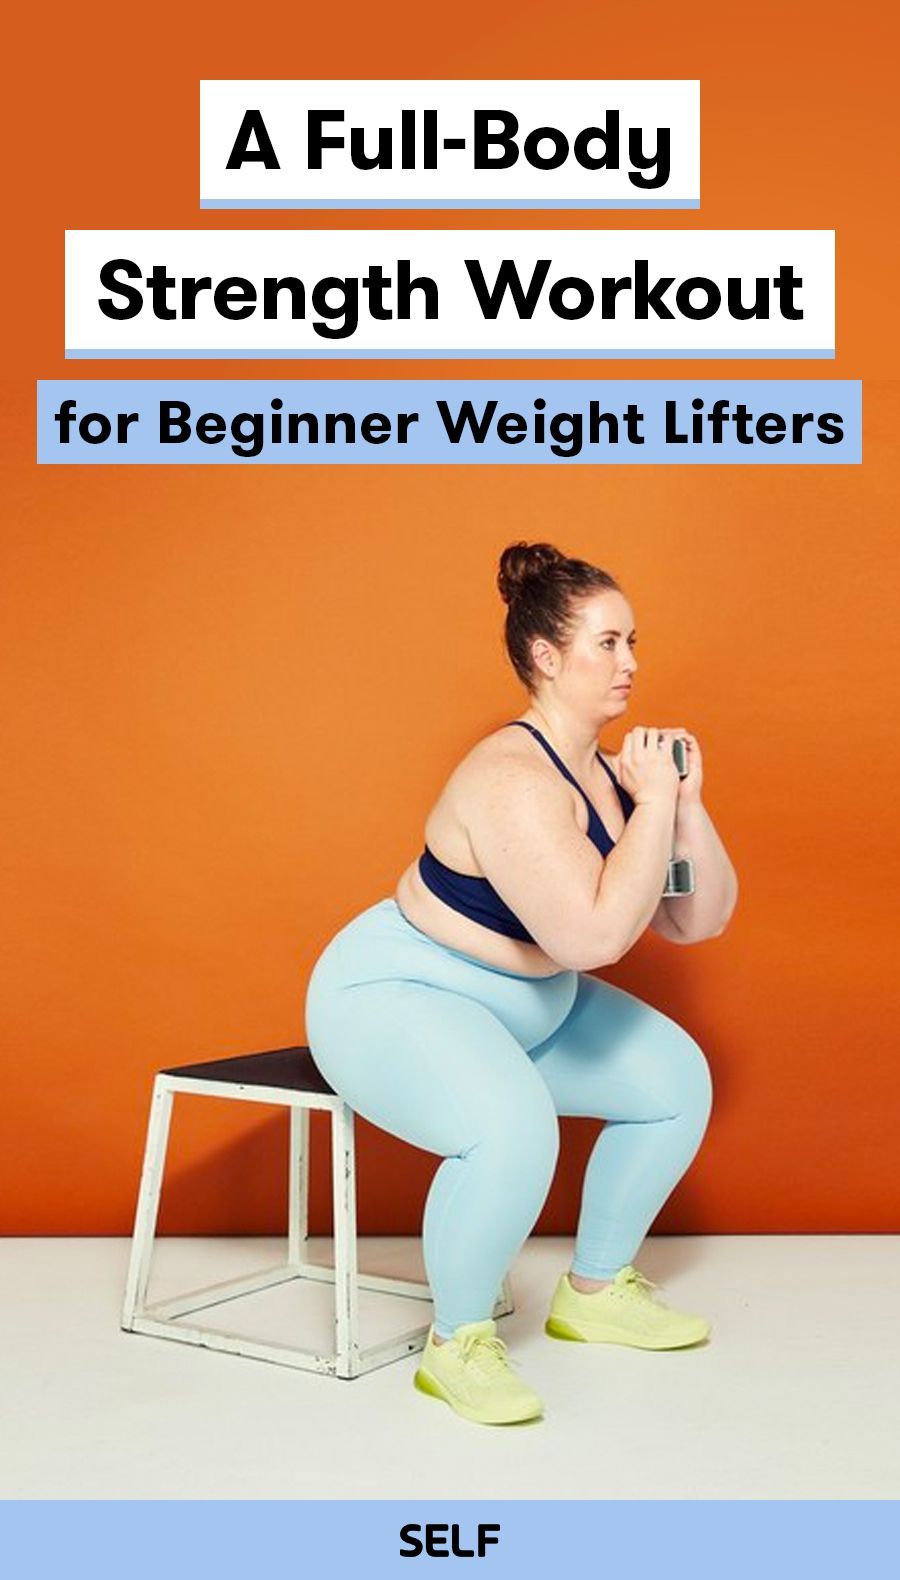 A Full-Body Strength Workout for Beginner Weight Lifters -   14 fitness Routine weights ideas